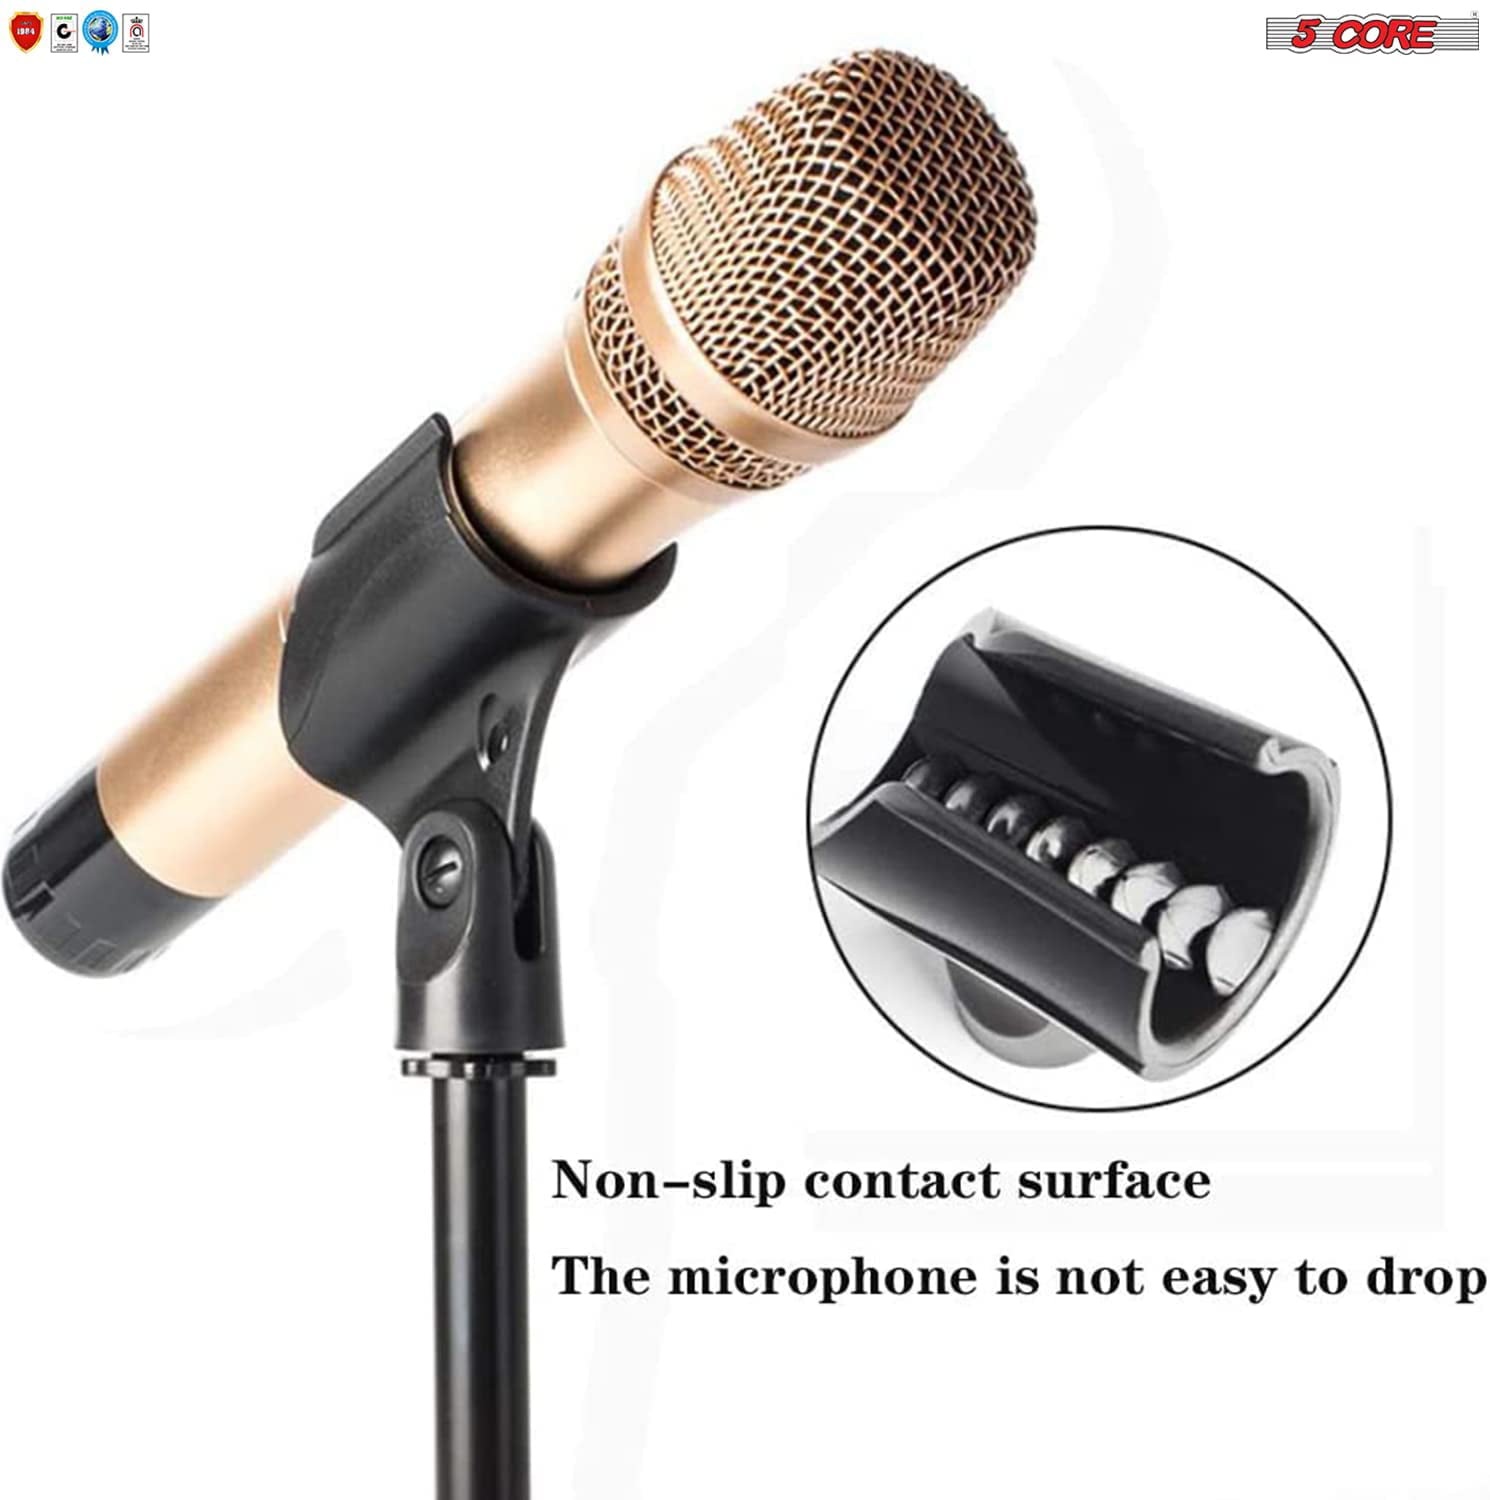 3-Pack Microphone Clip Break Resistant Stand Adapter for Handheld Wired Mics with ¾” Barrel Diameter 5 Core MC 06 3PCS… 